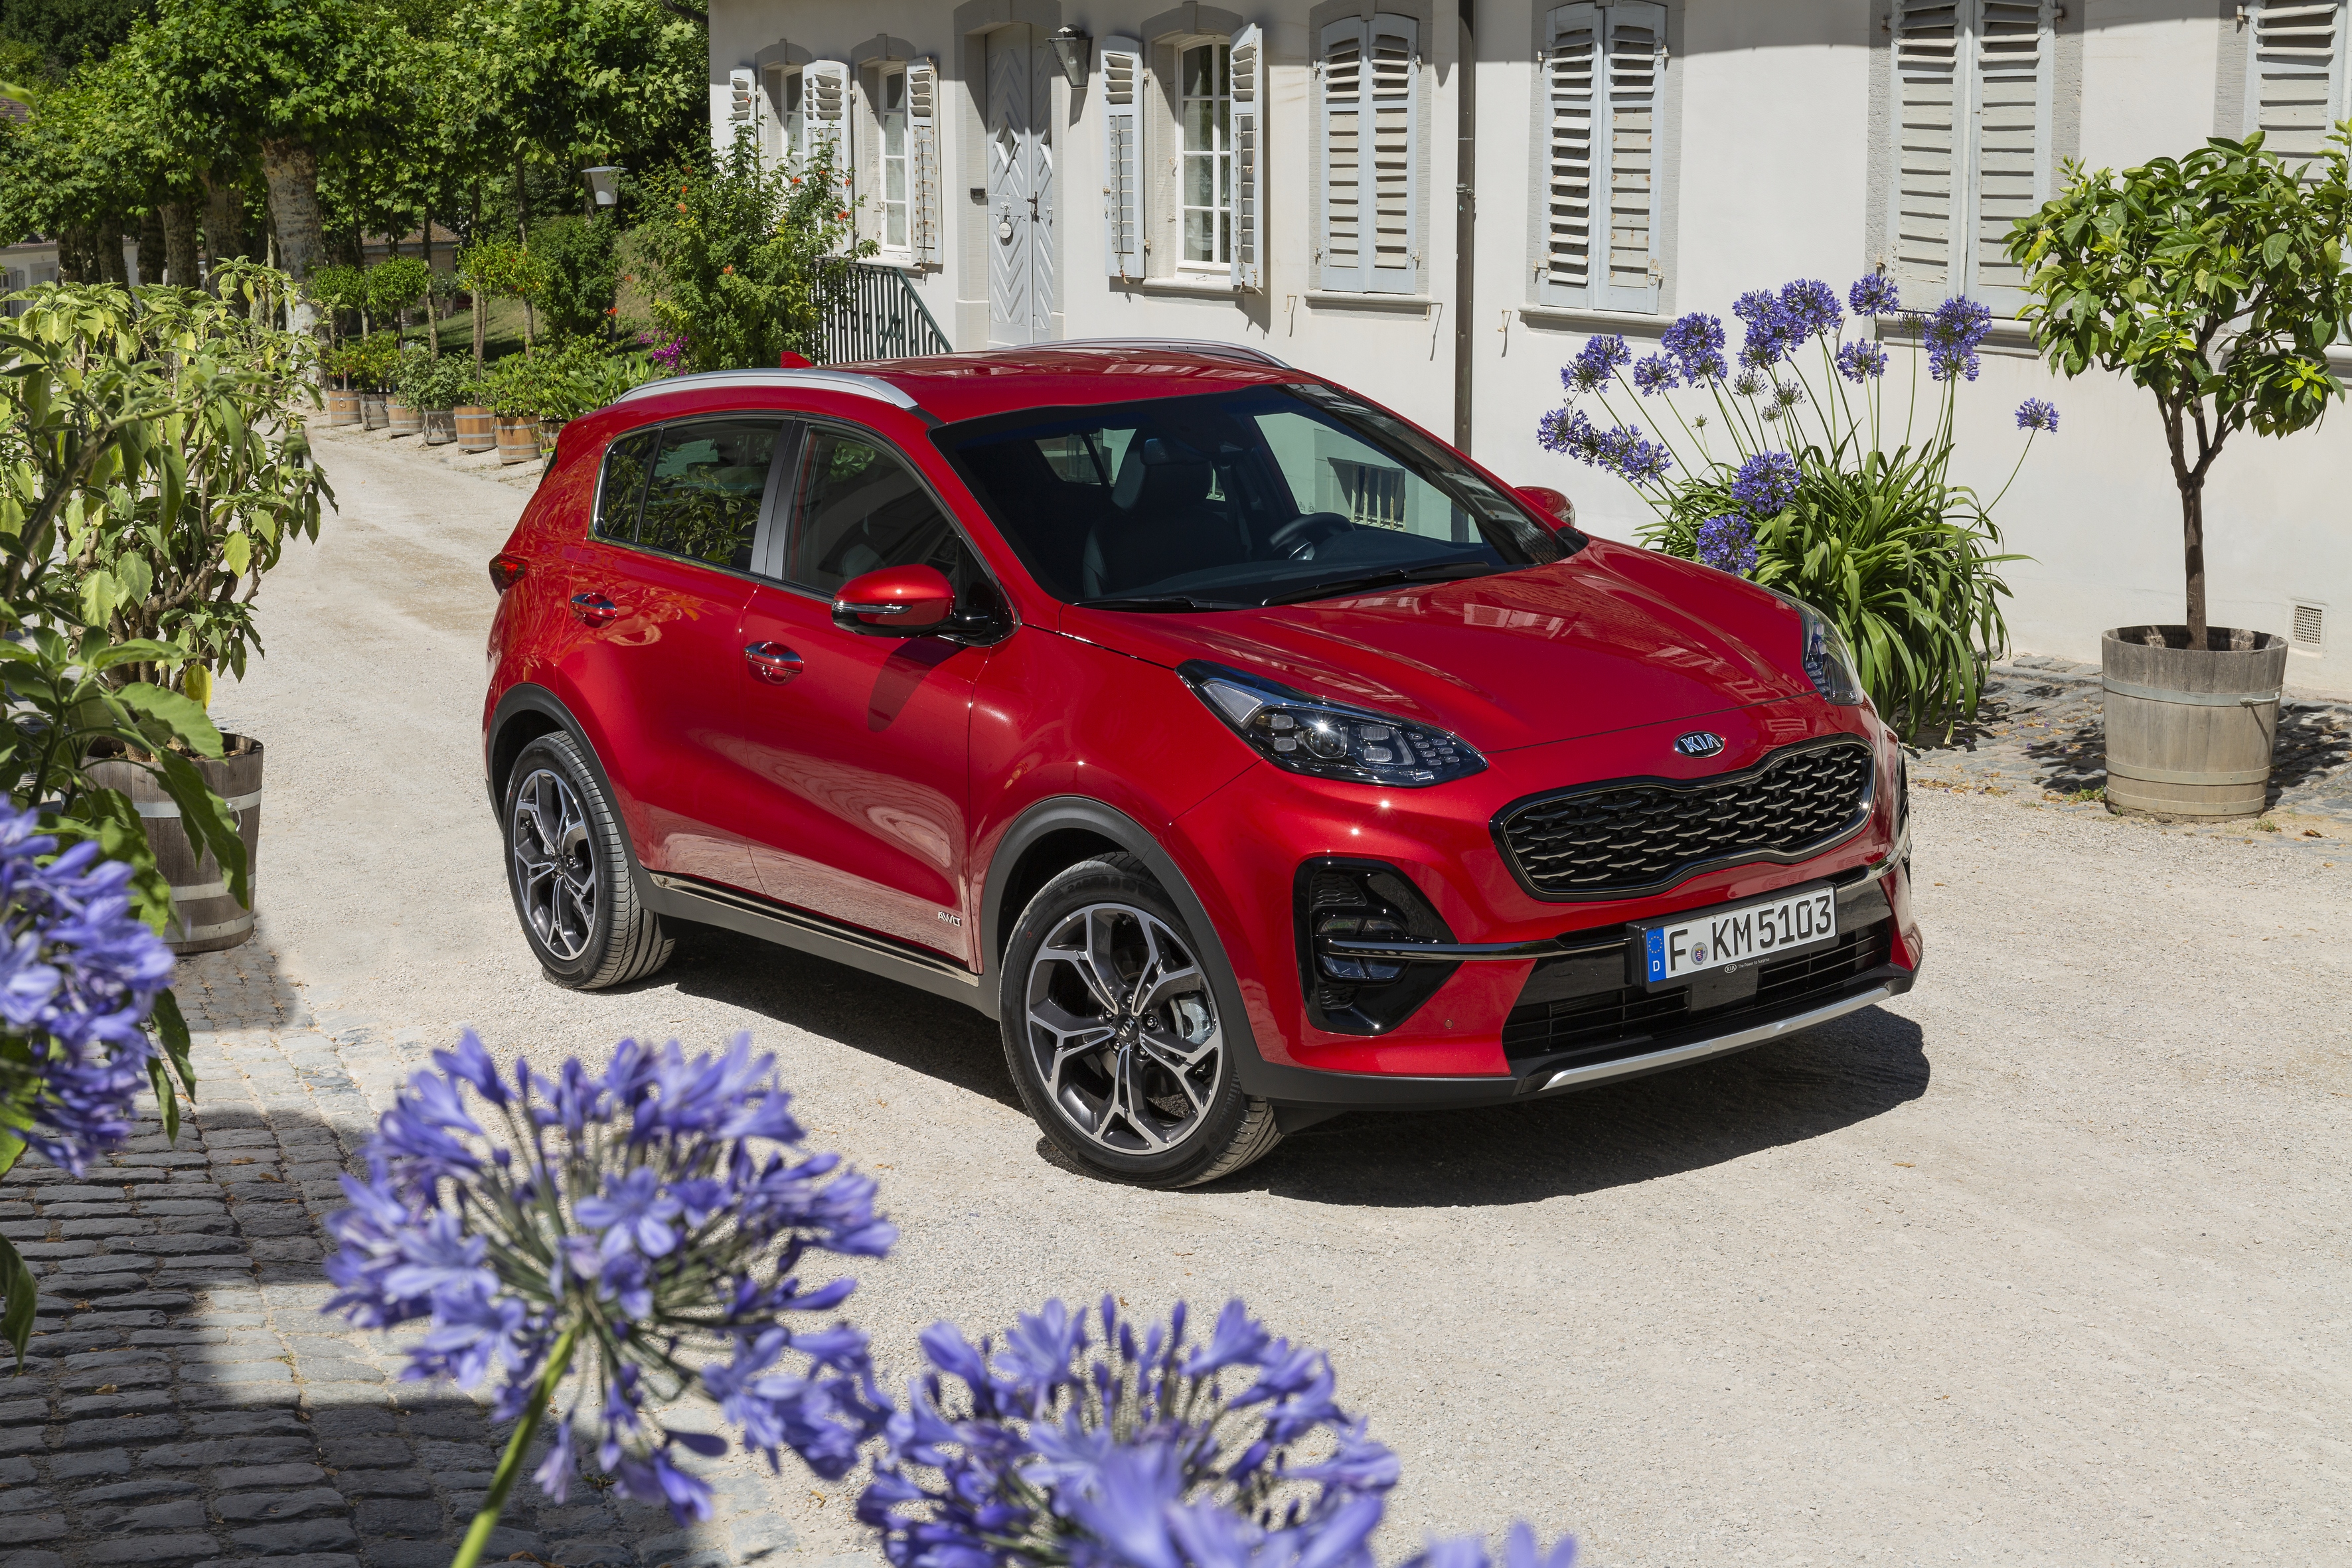 Kia Sportage Facelift to Arrive in October, More Details & Gallery